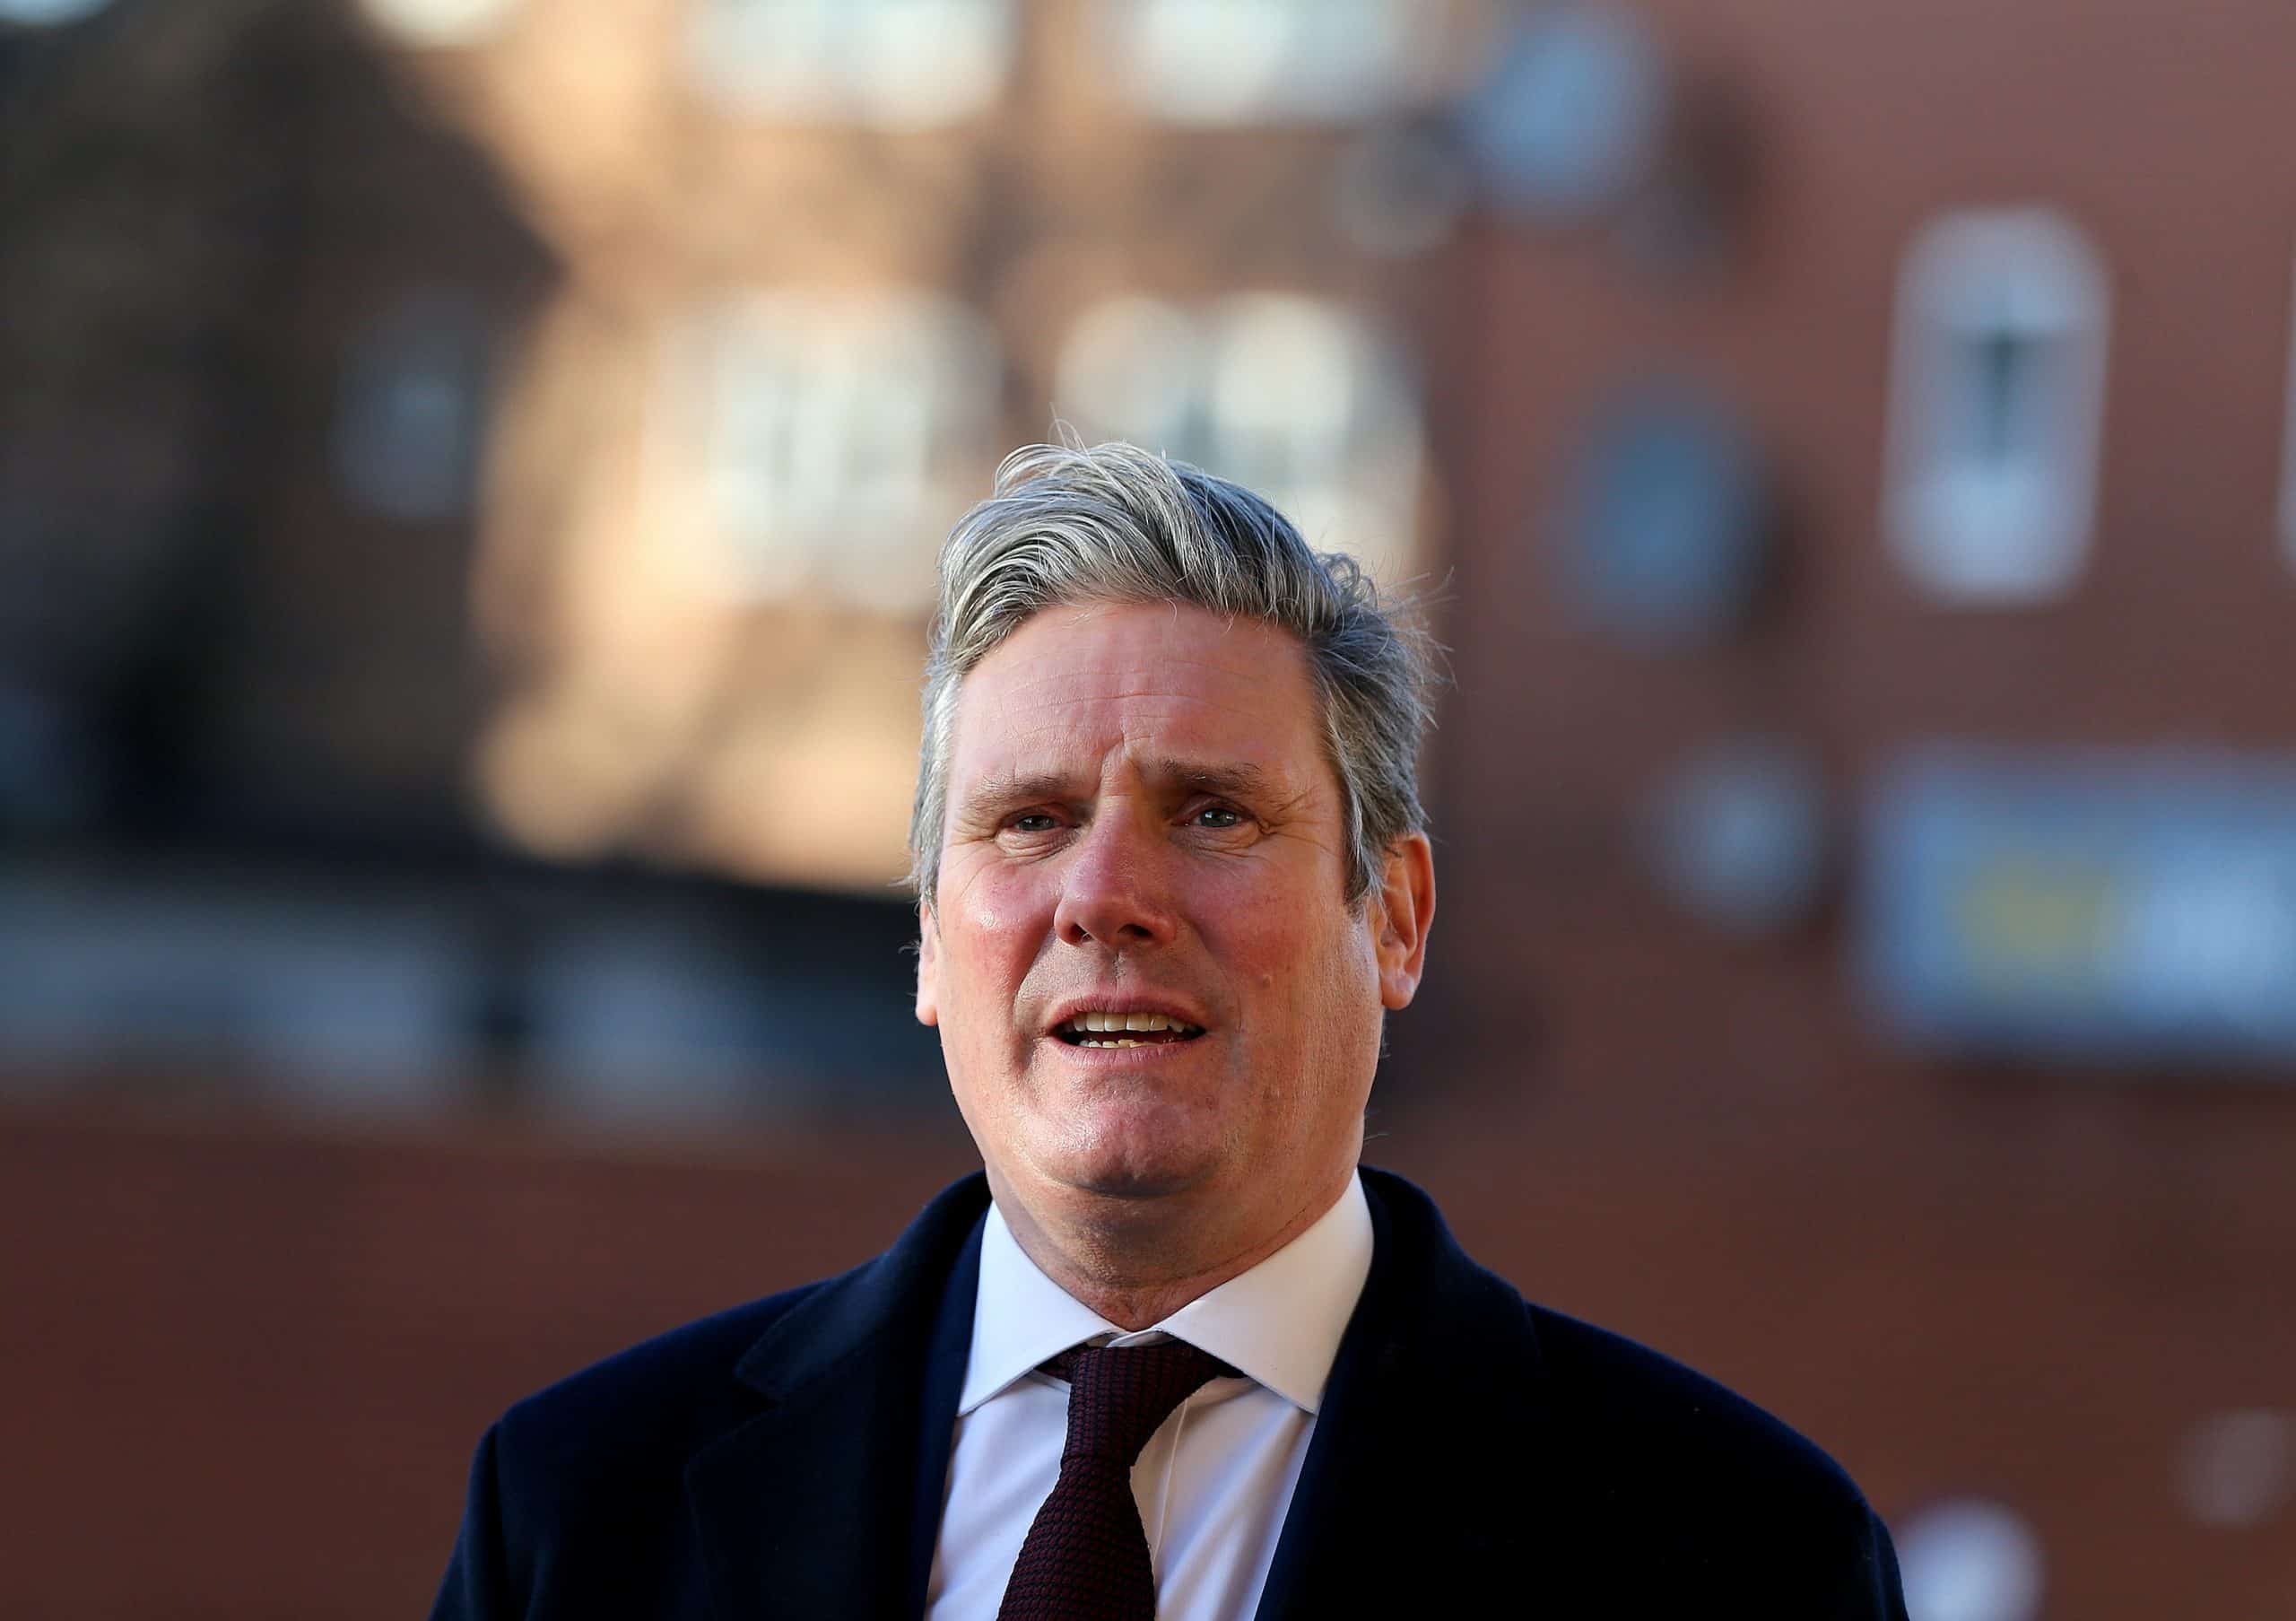 Almost 20% of Labour MPs rebel against Starmer over Brexit deal support